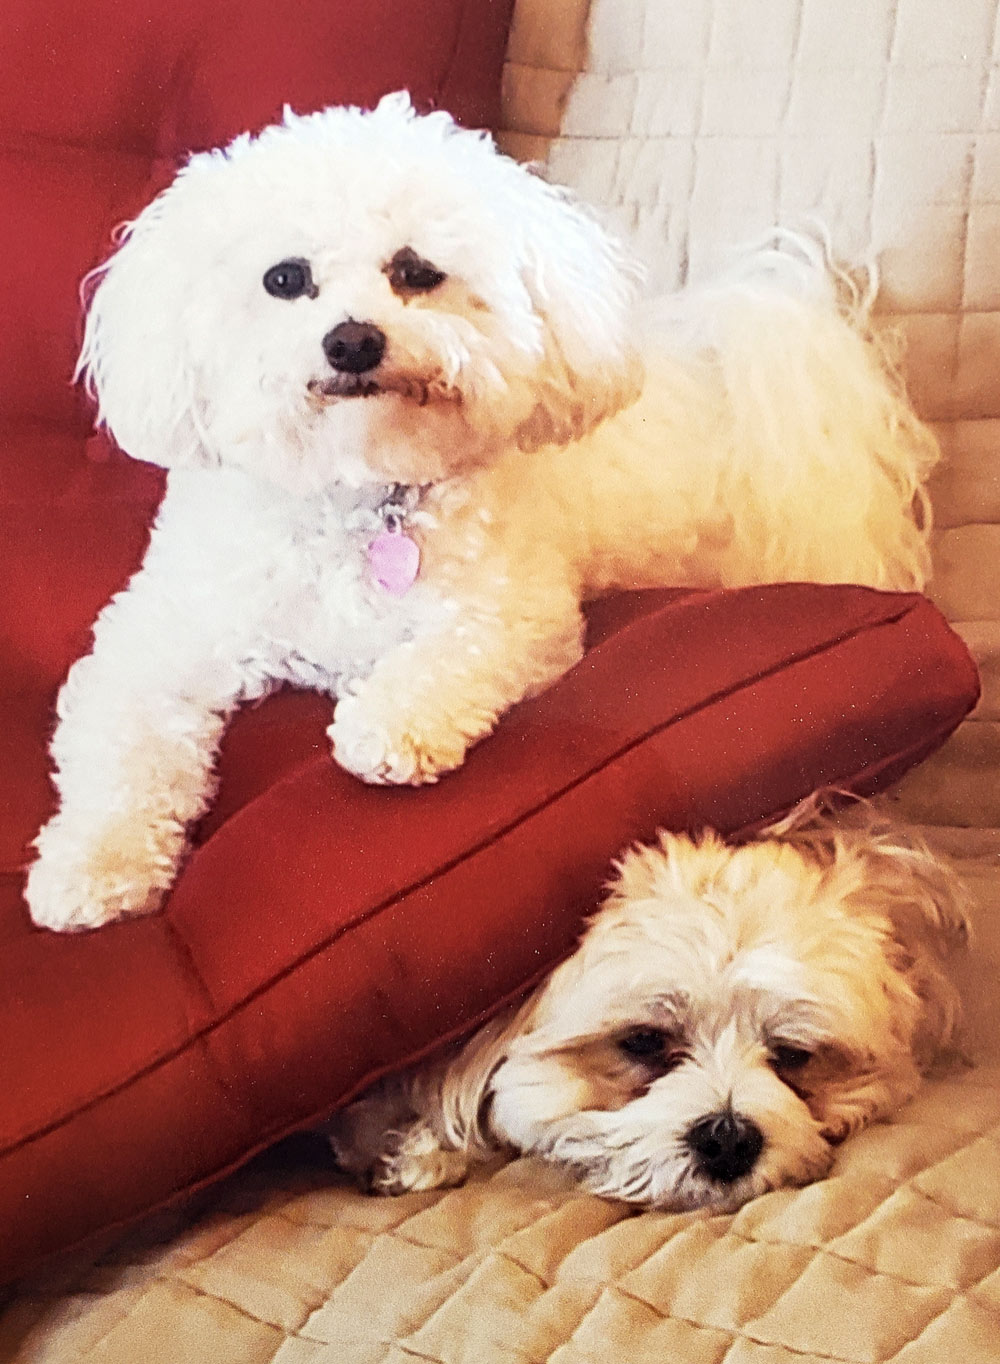 Meet Lexi and Dolli. Owner Sandee says they are such good buddies!